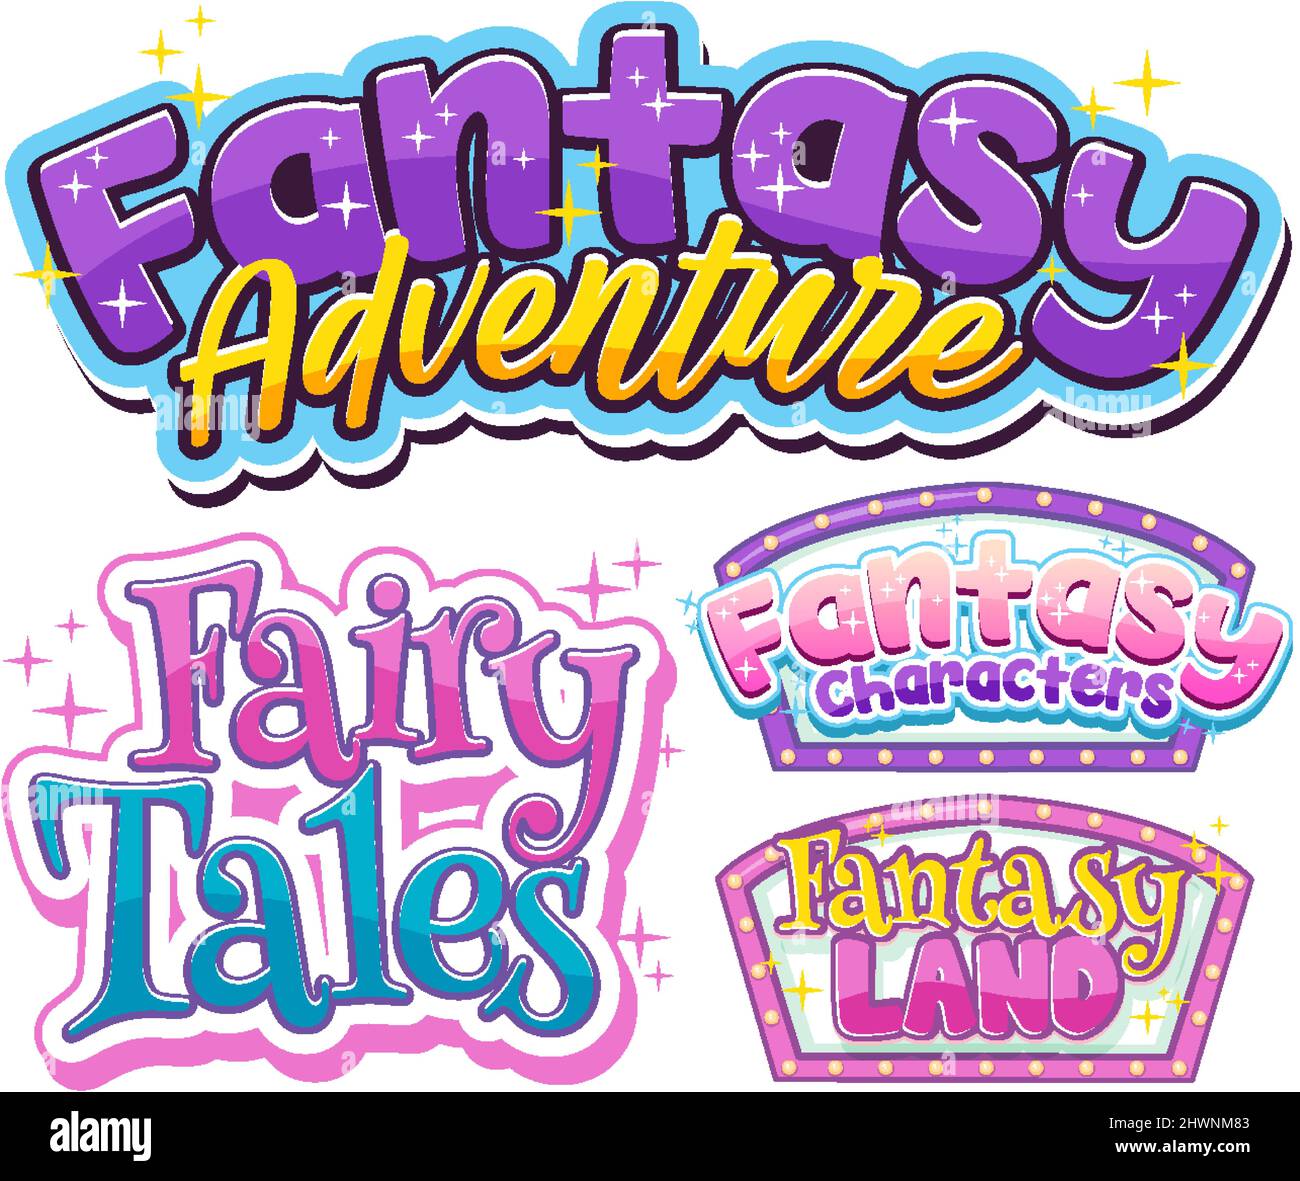 Set of fantasy fairy tales word banners illustration Stock Vector